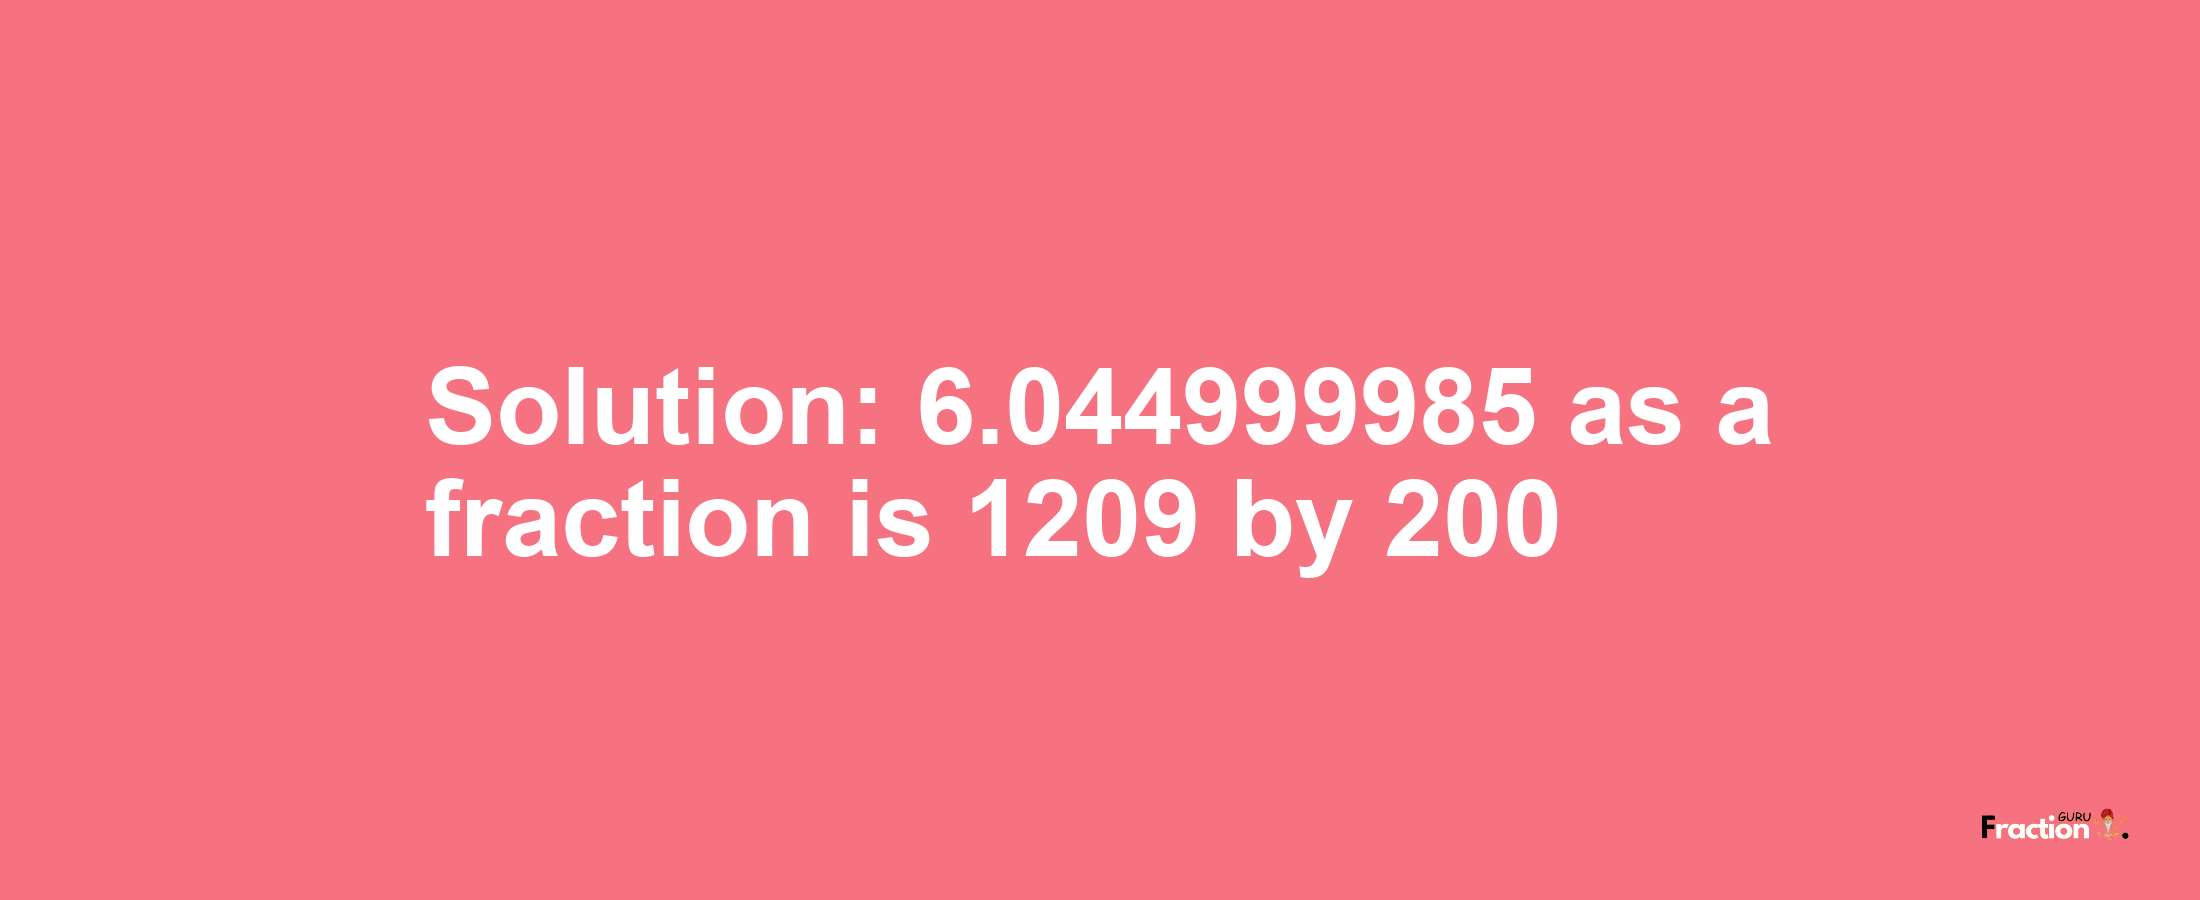 Solution:6.044999985 as a fraction is 1209/200